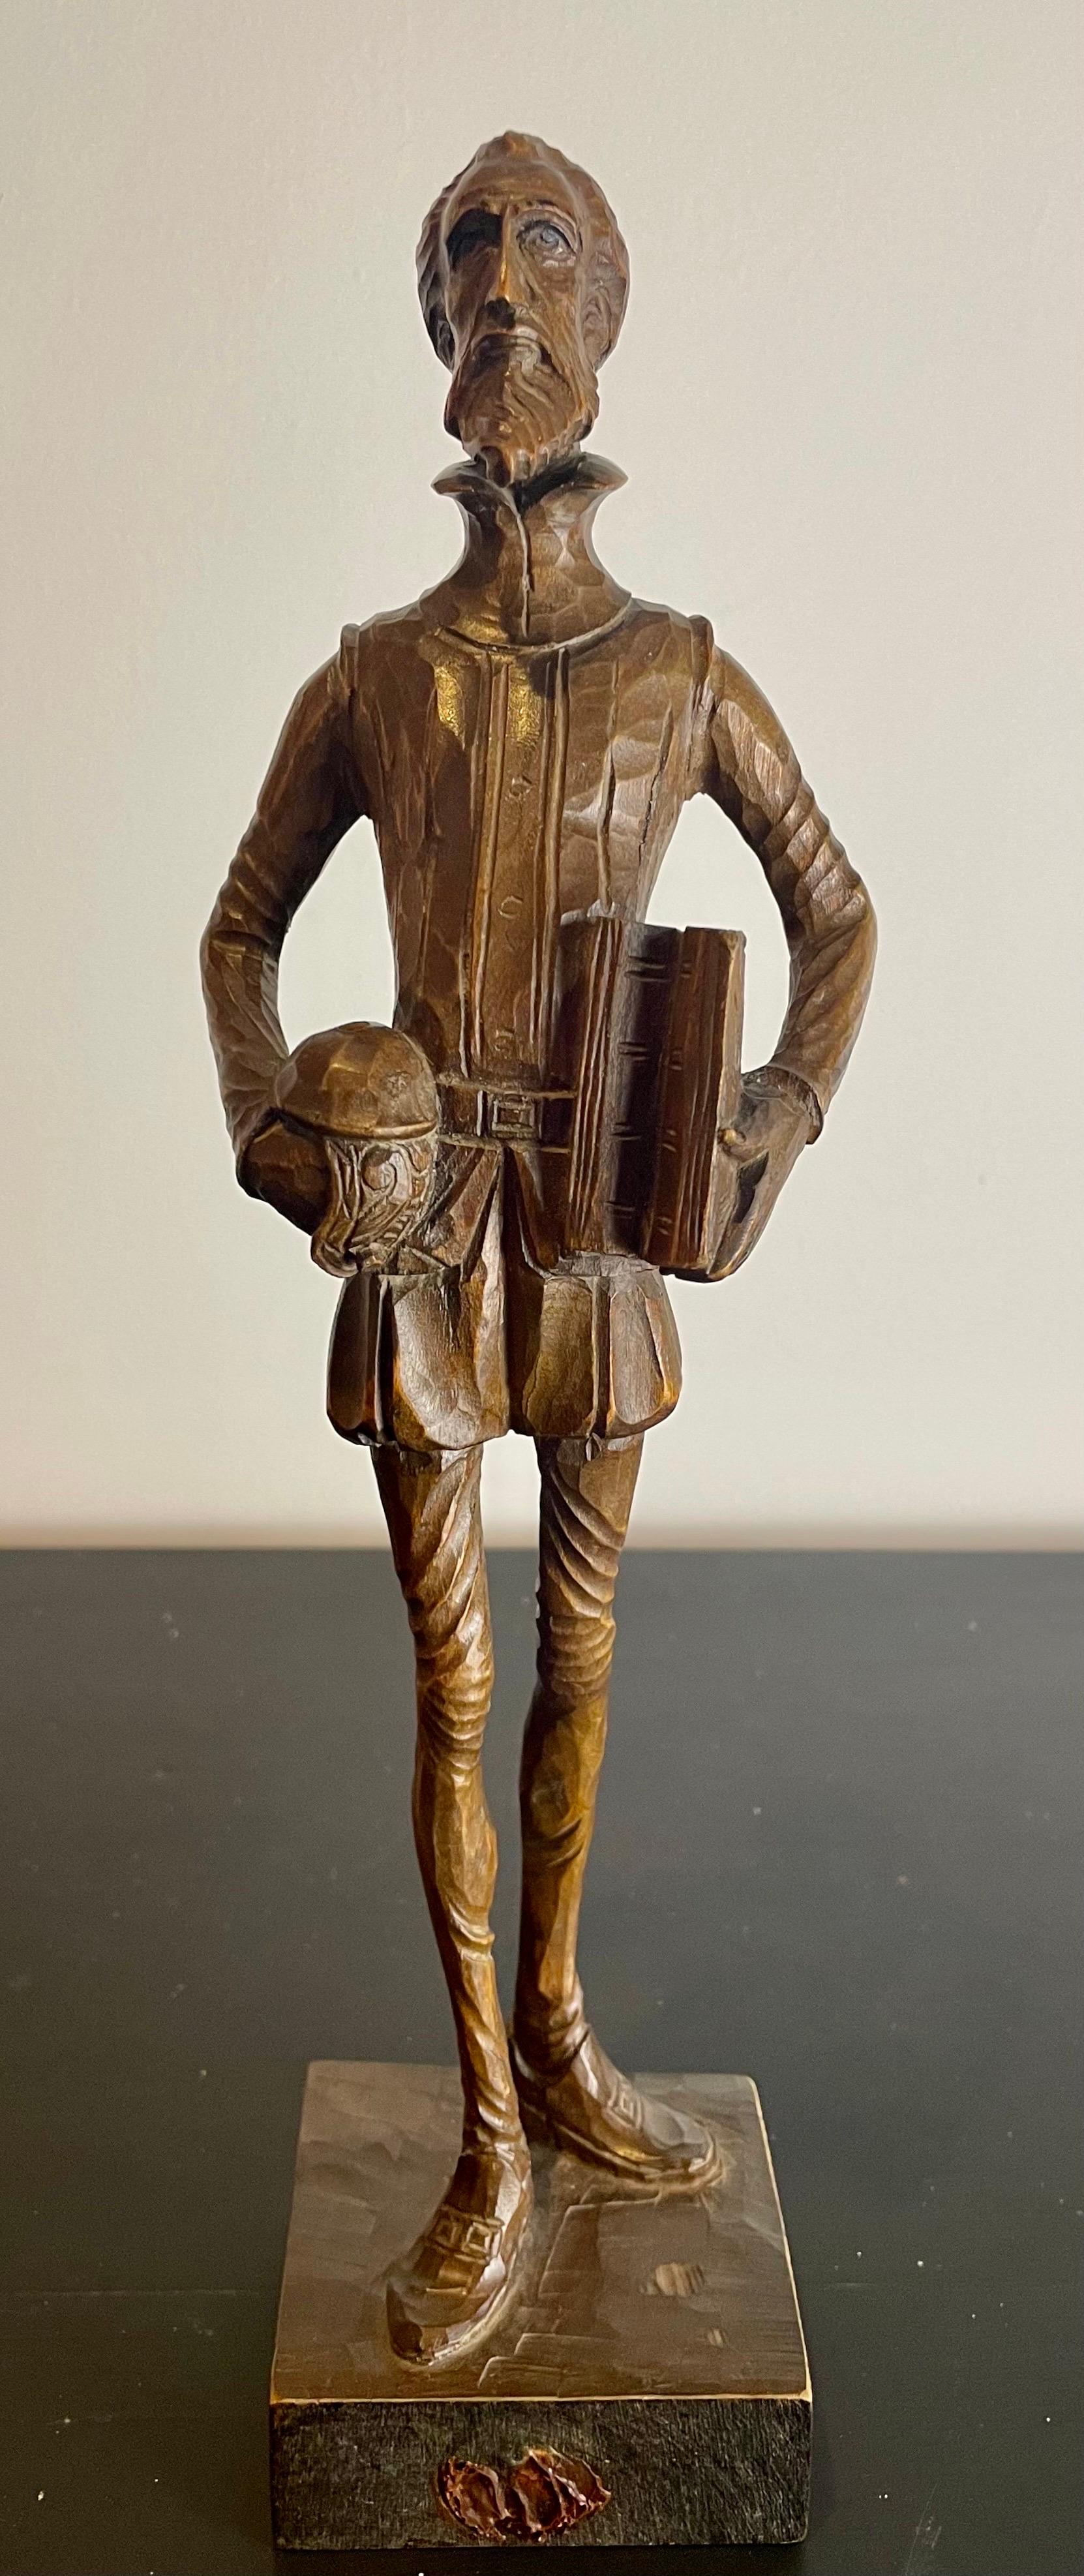 Very beautiful hand-carved wooden statuette representing the character of Don Quixote, from the novel by Cervantes.
Very fine and very well made sculpture.
Very beautiful, particularly detailed craftsmanship from a single piece of wood.
He is shown